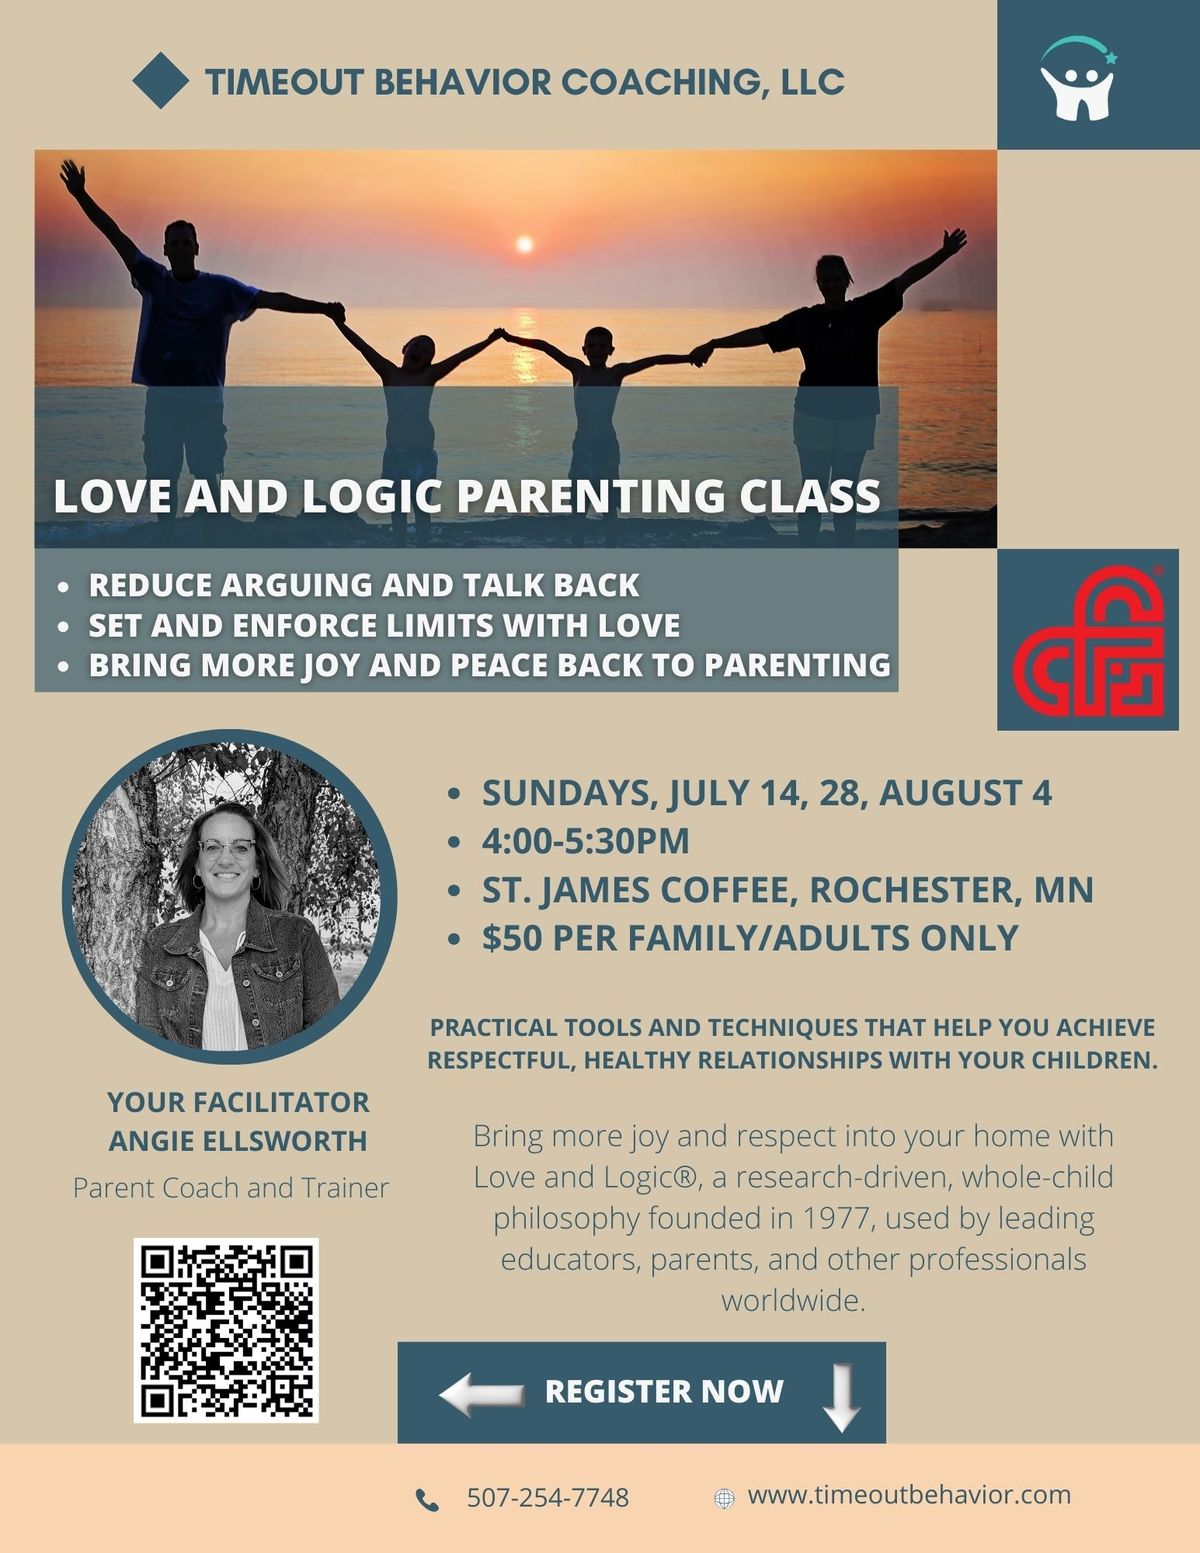 Parenting with Love and Logic Series